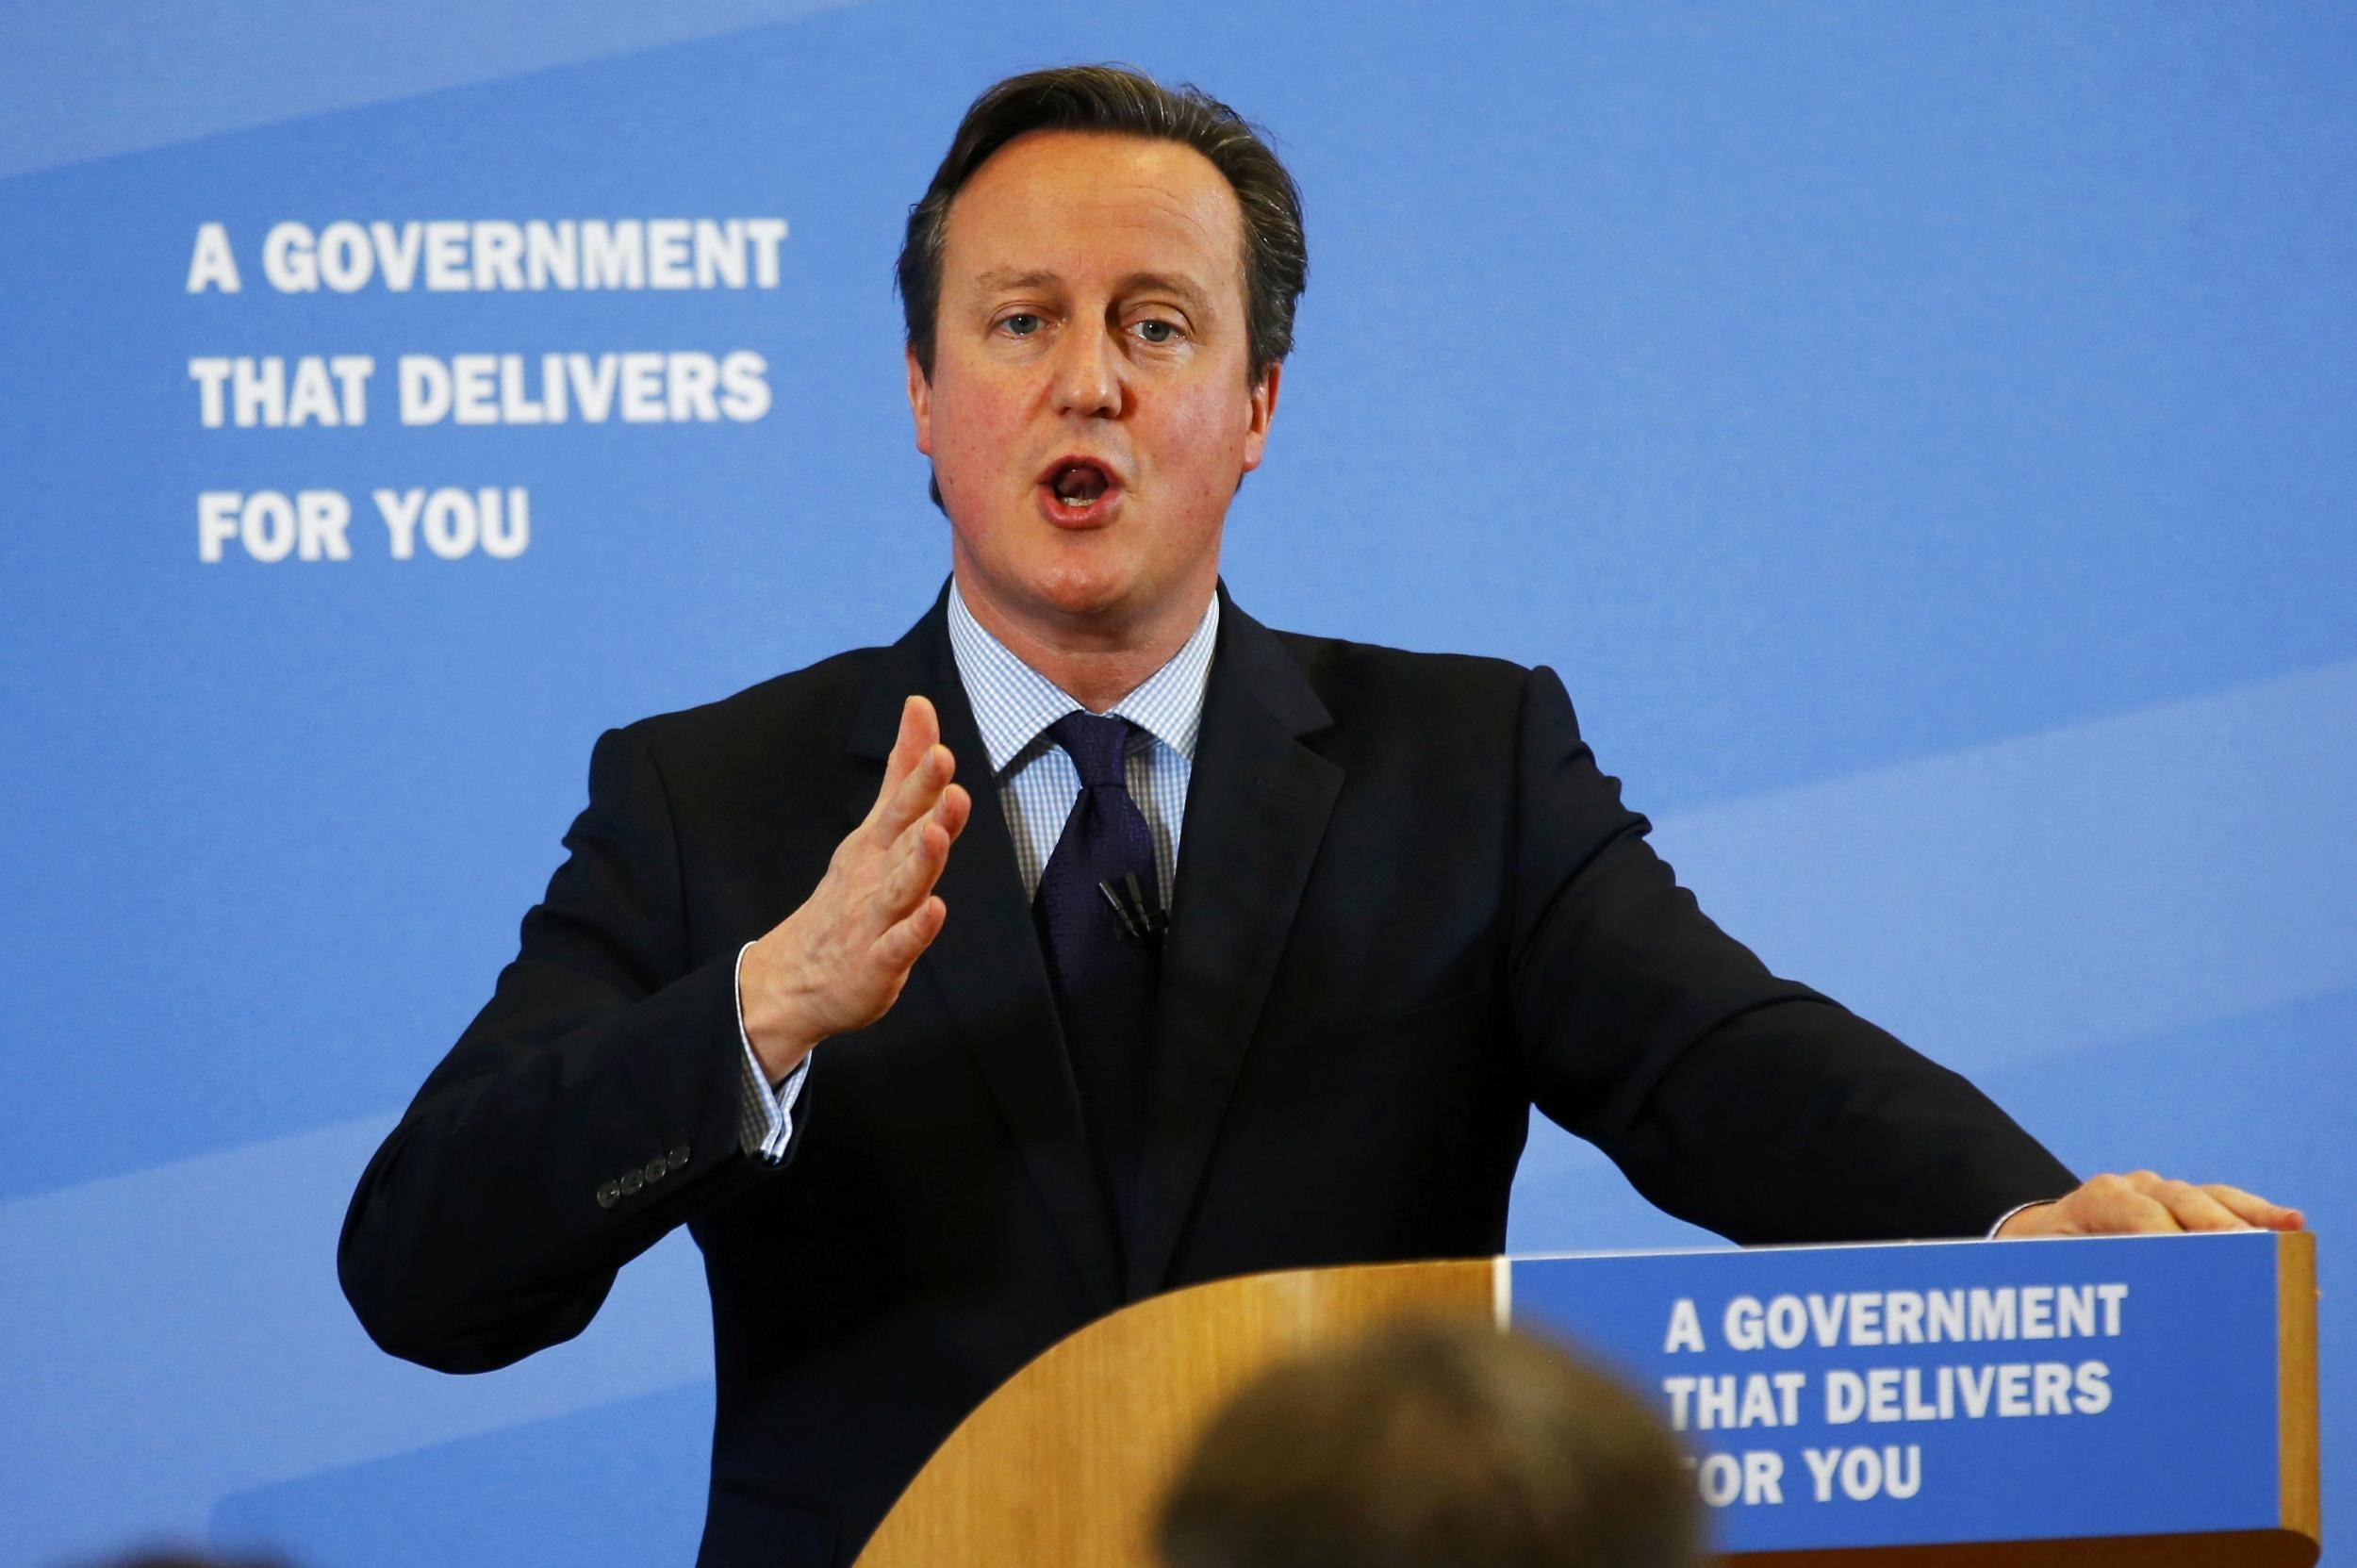 David Cameron admitted last week that he had given up hope of securing a deal this month